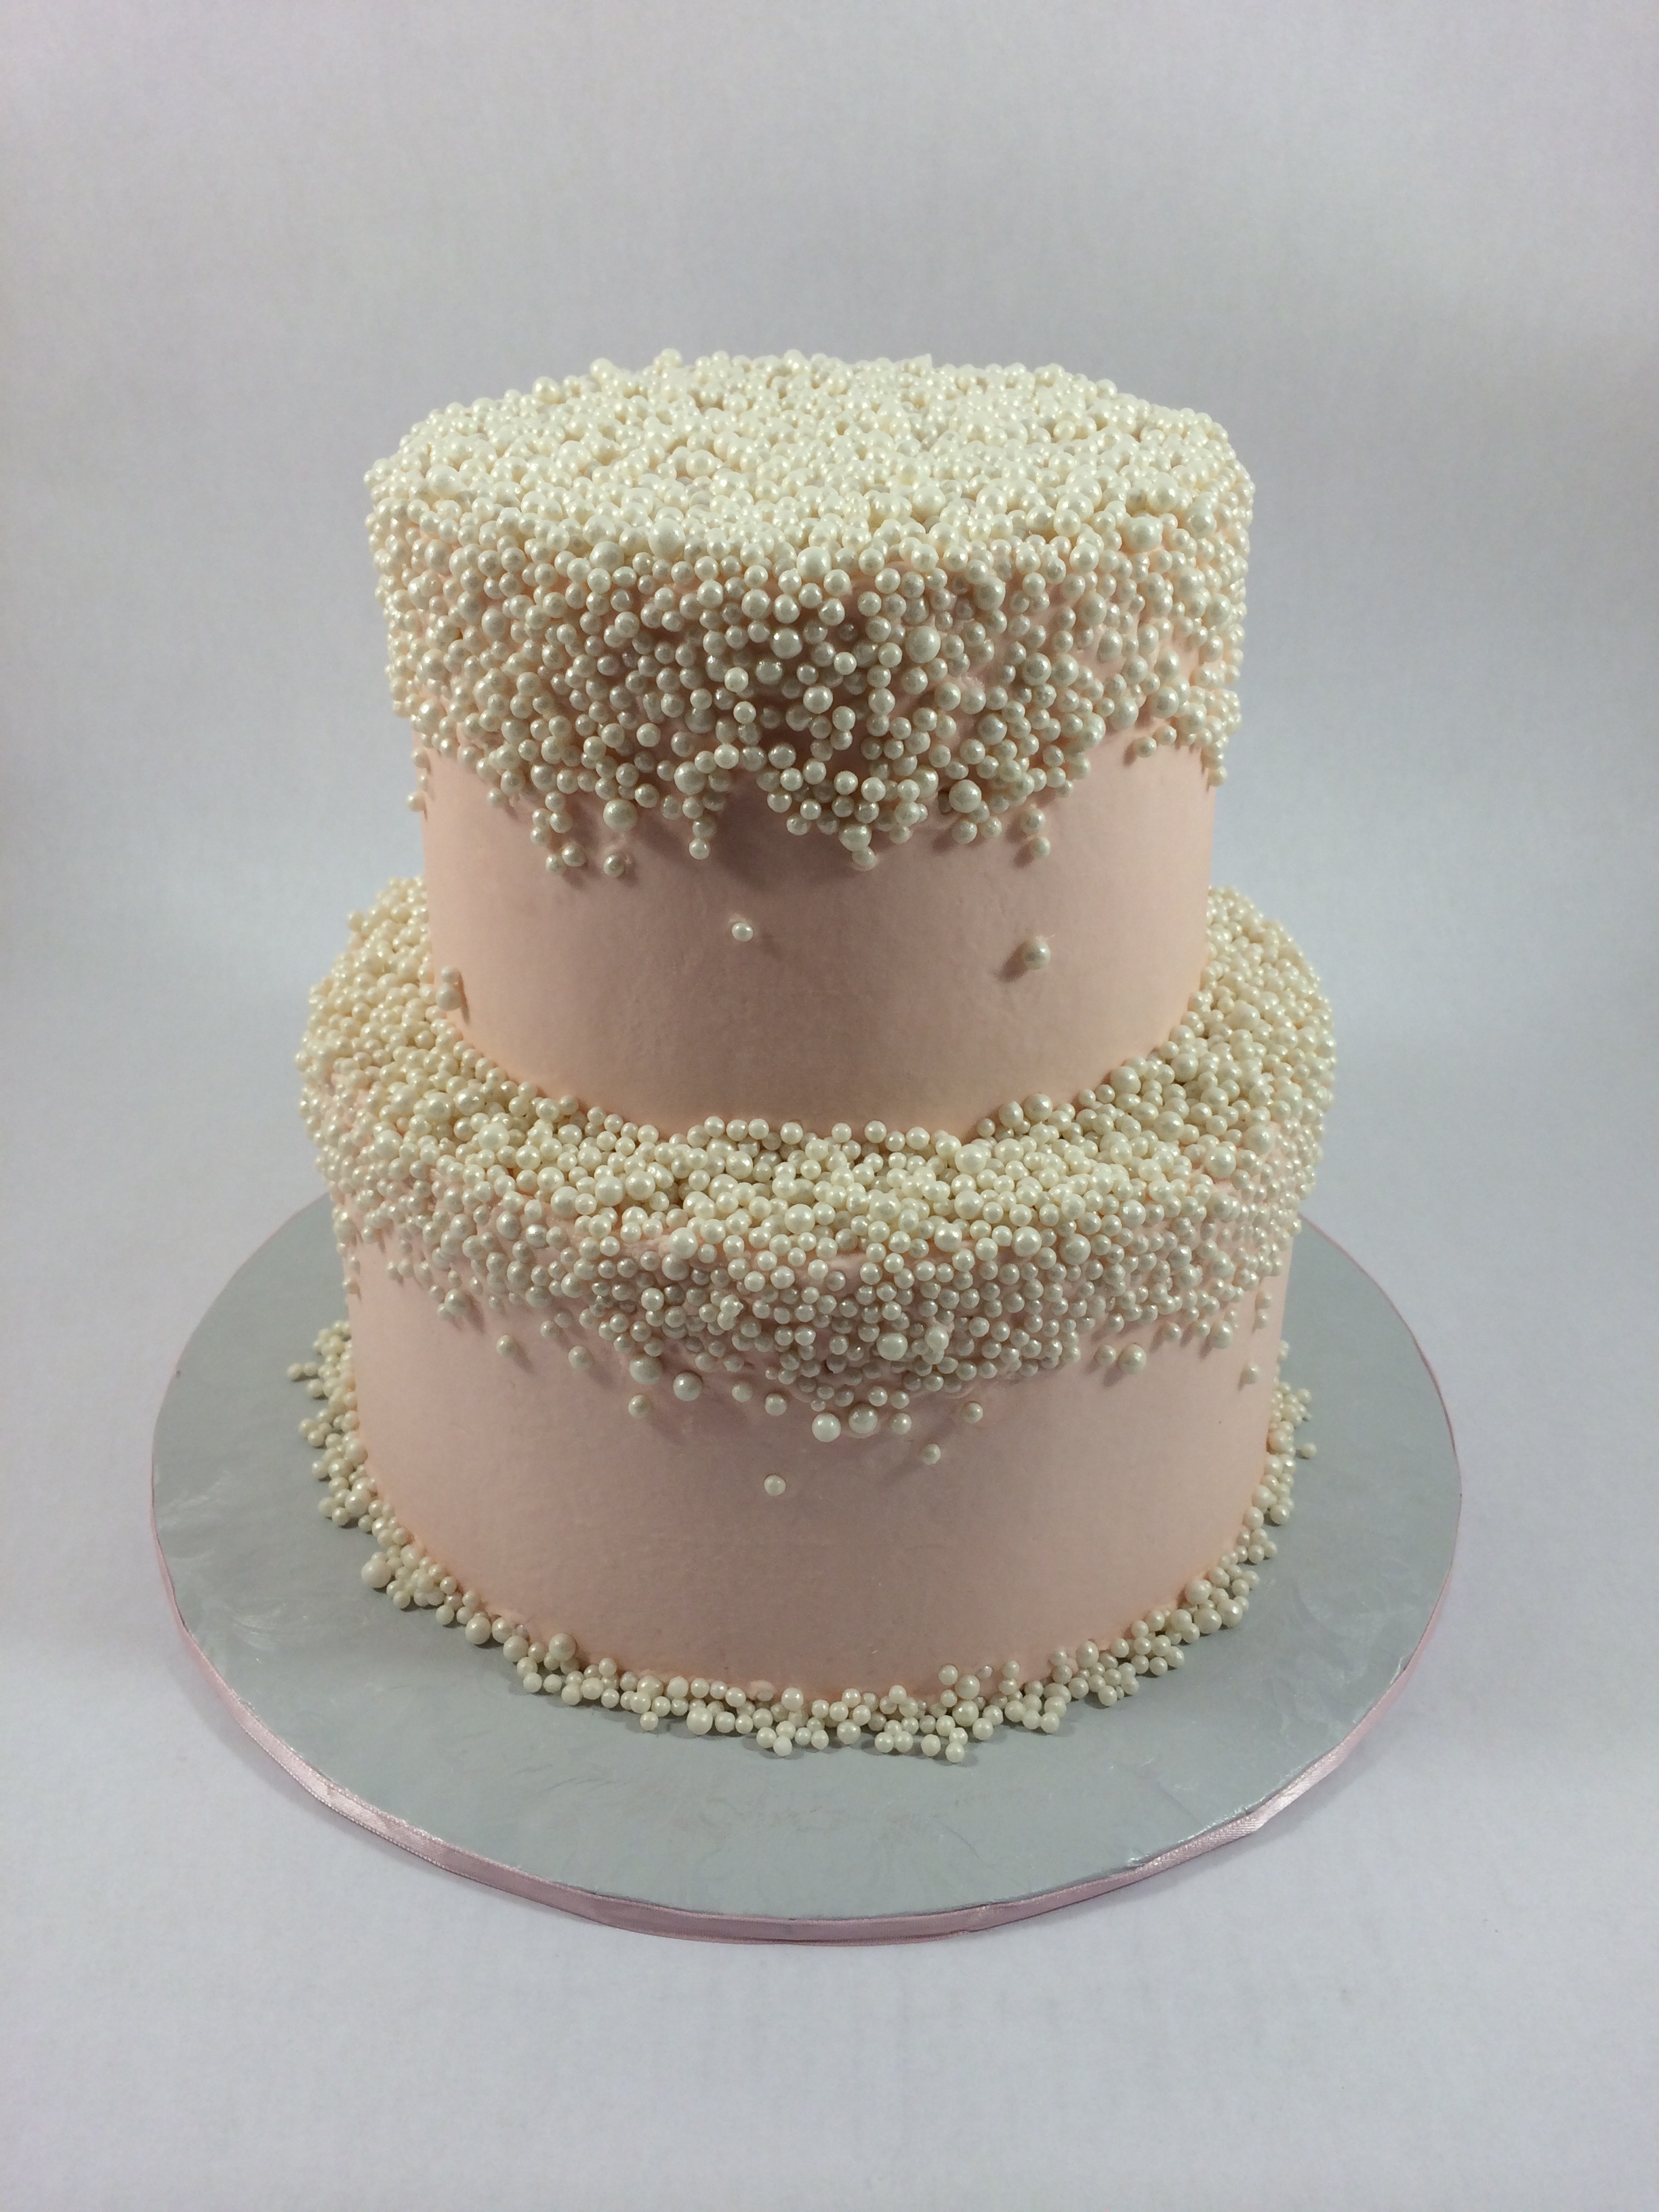 Cake with zillions of sugar pearls.JPG